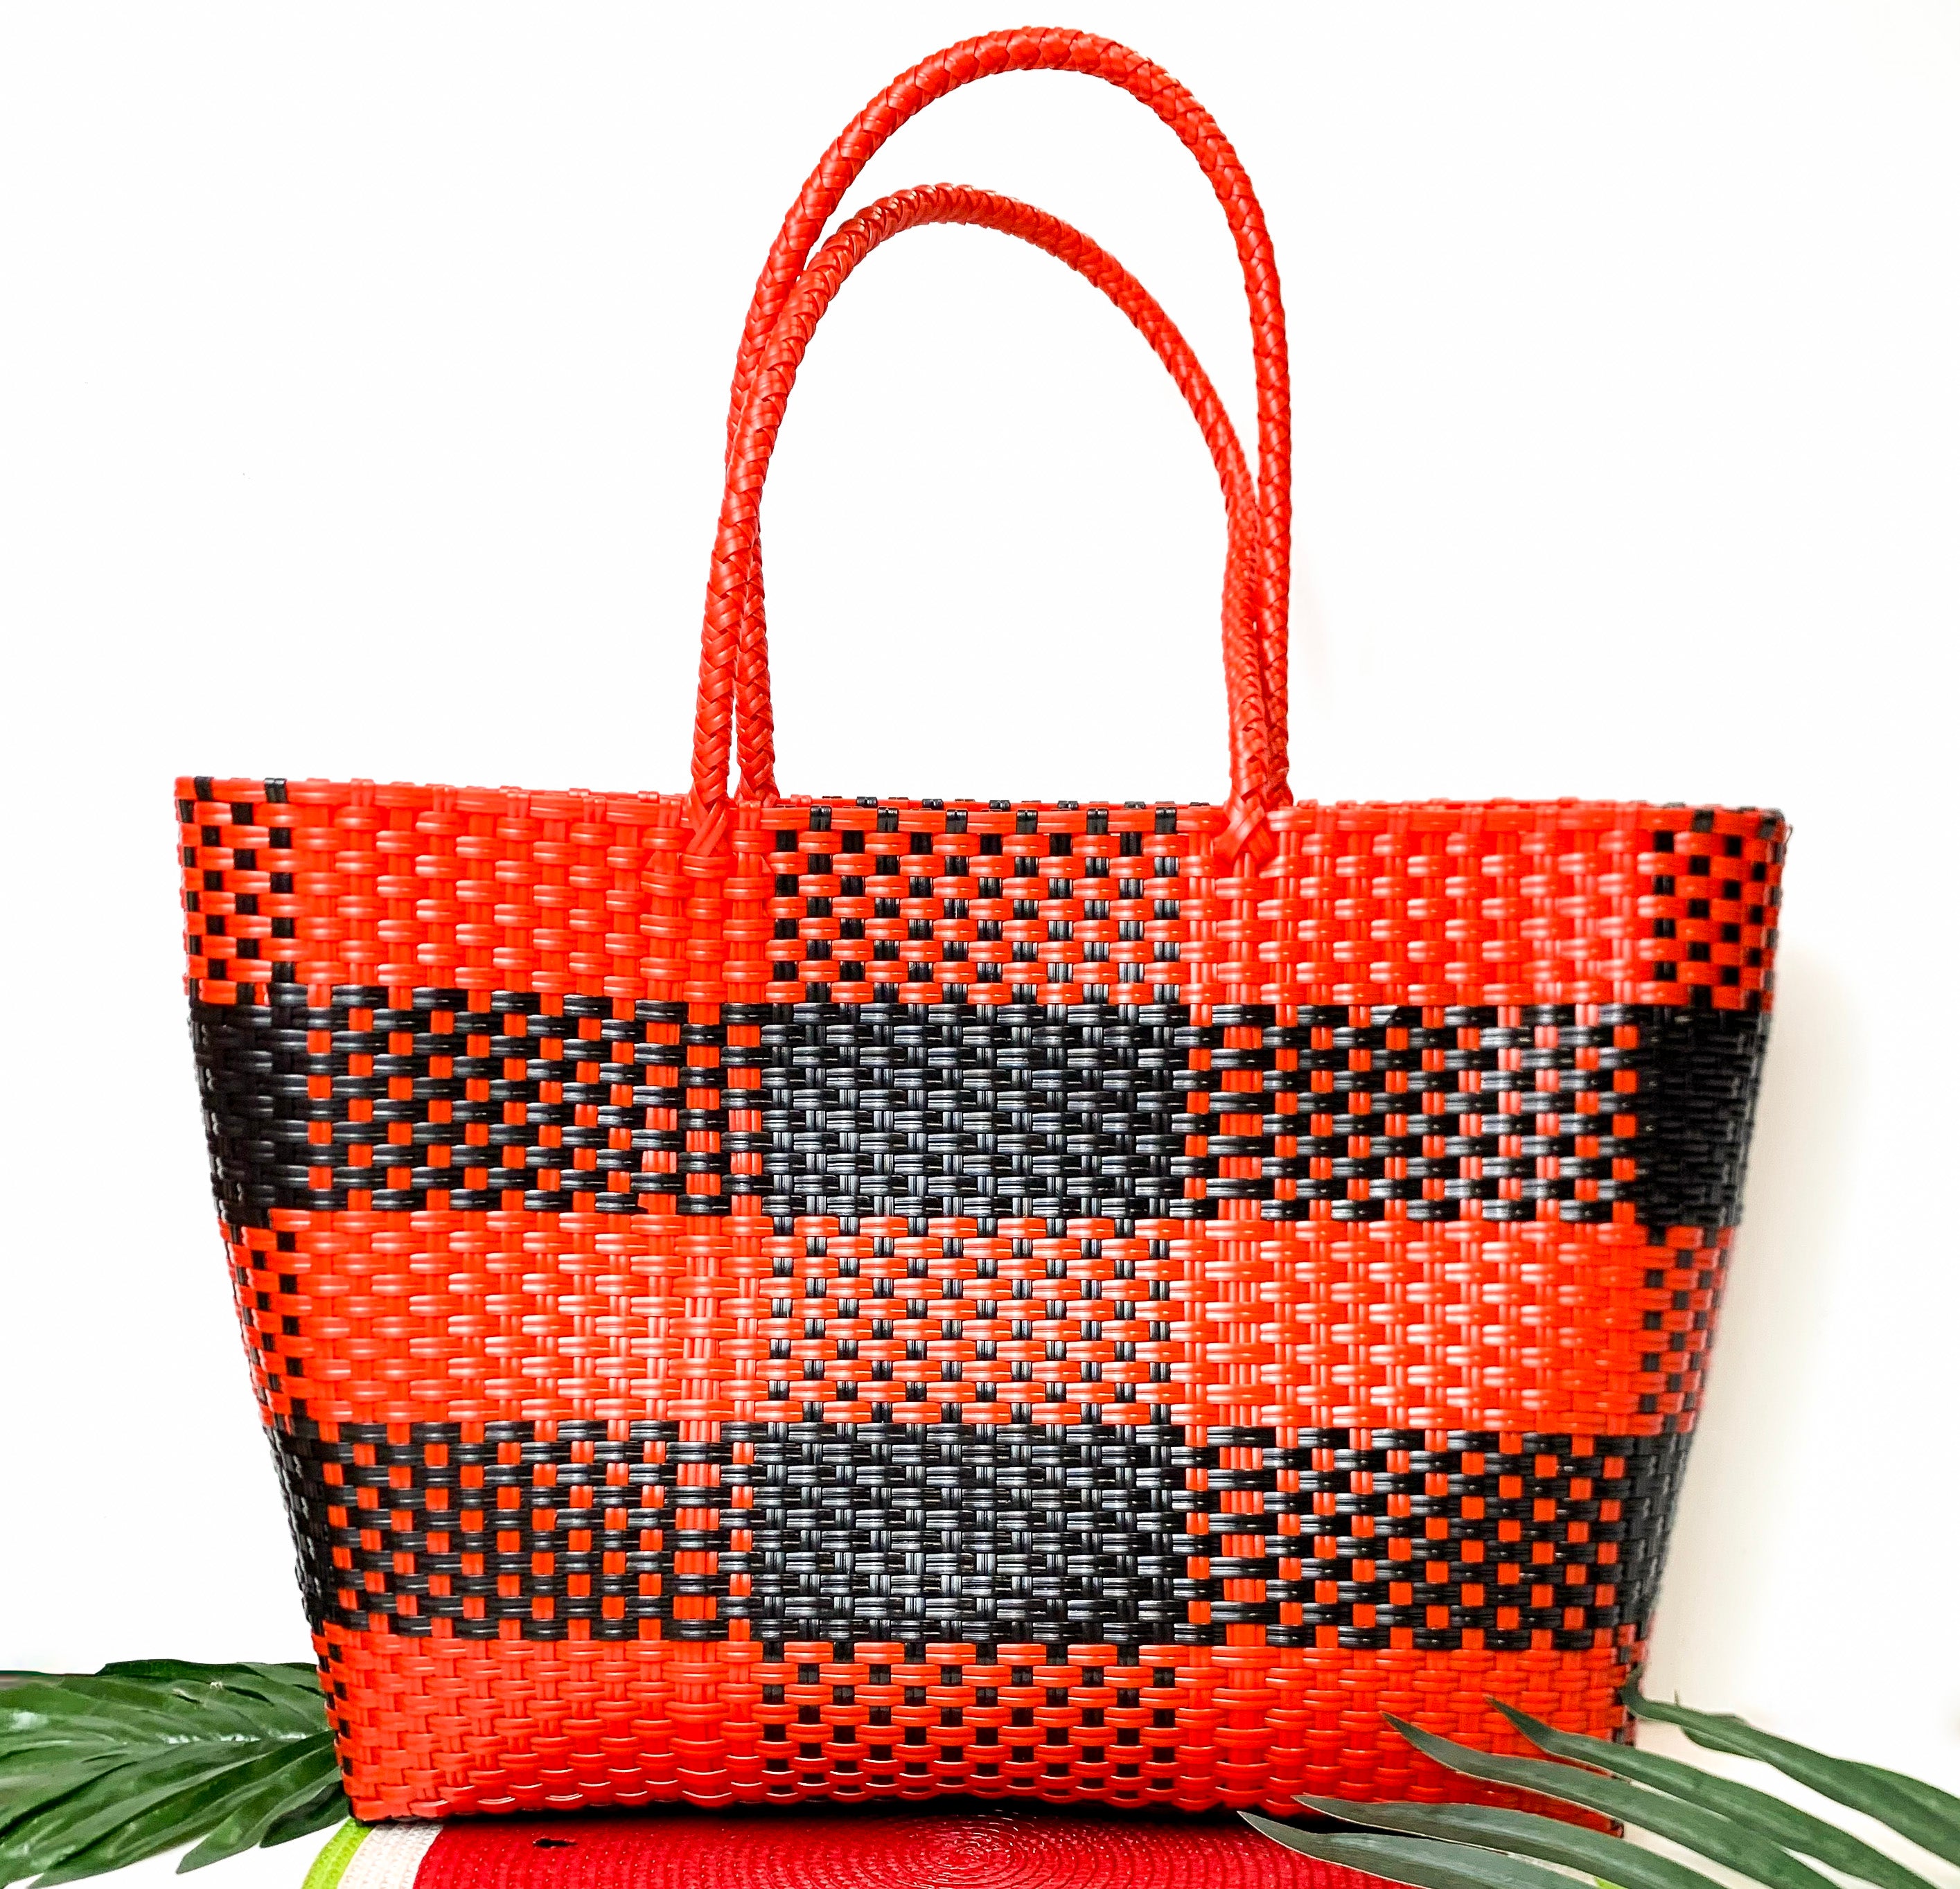 Garden Party Gingham Tote Bag in Red and Black - Giddy Up Glamour Boutique